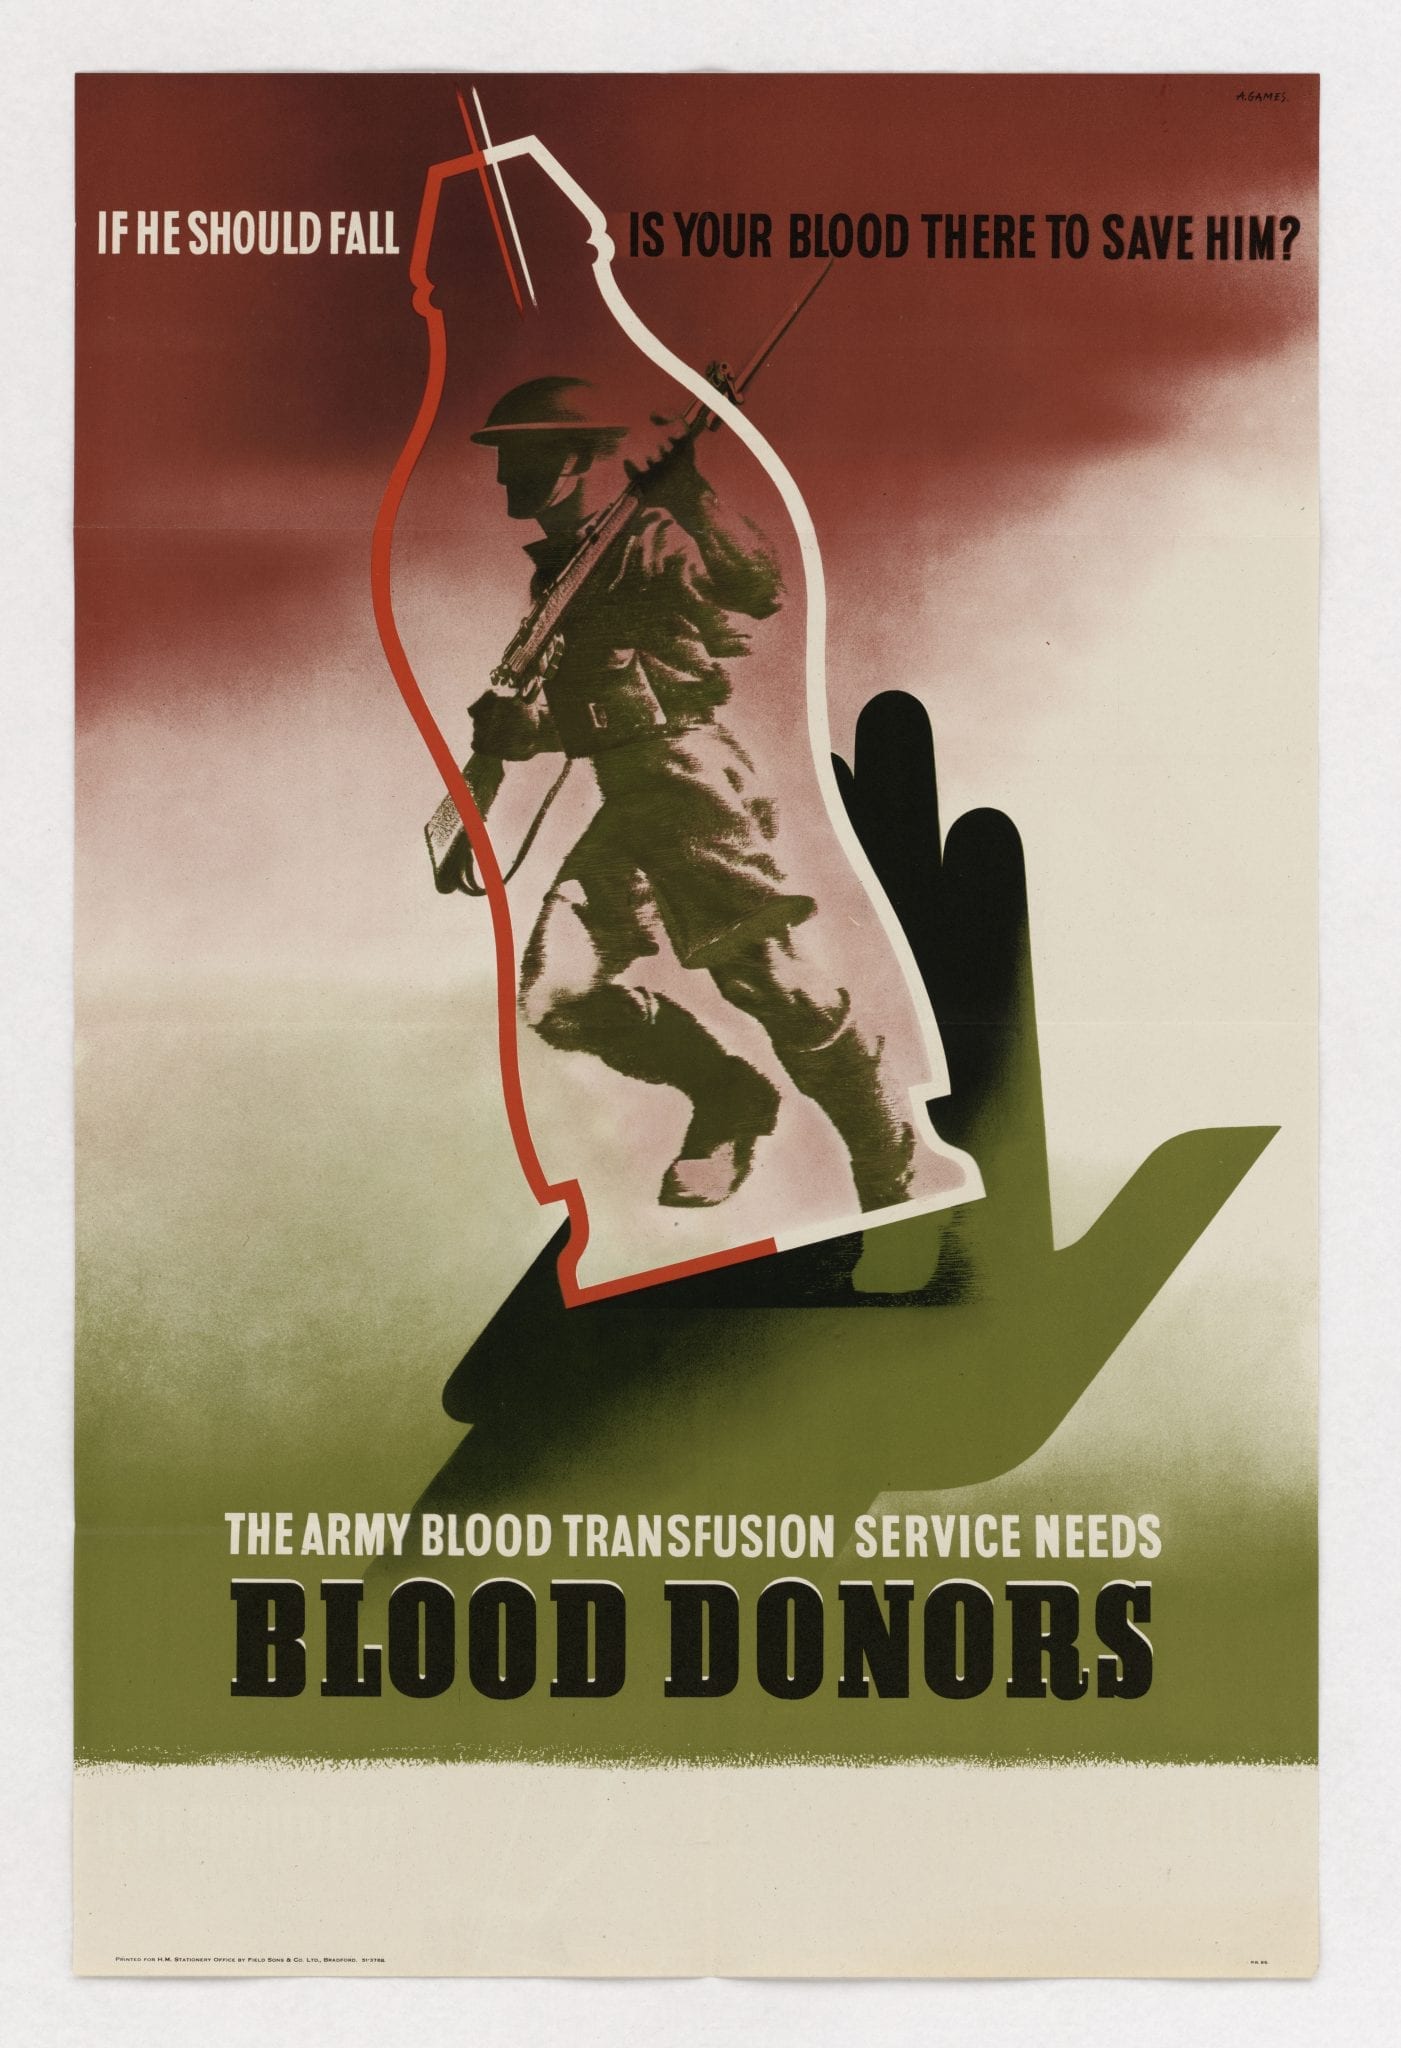 Red Cross poster calling for blood donors, though many were unable to donate because of their race